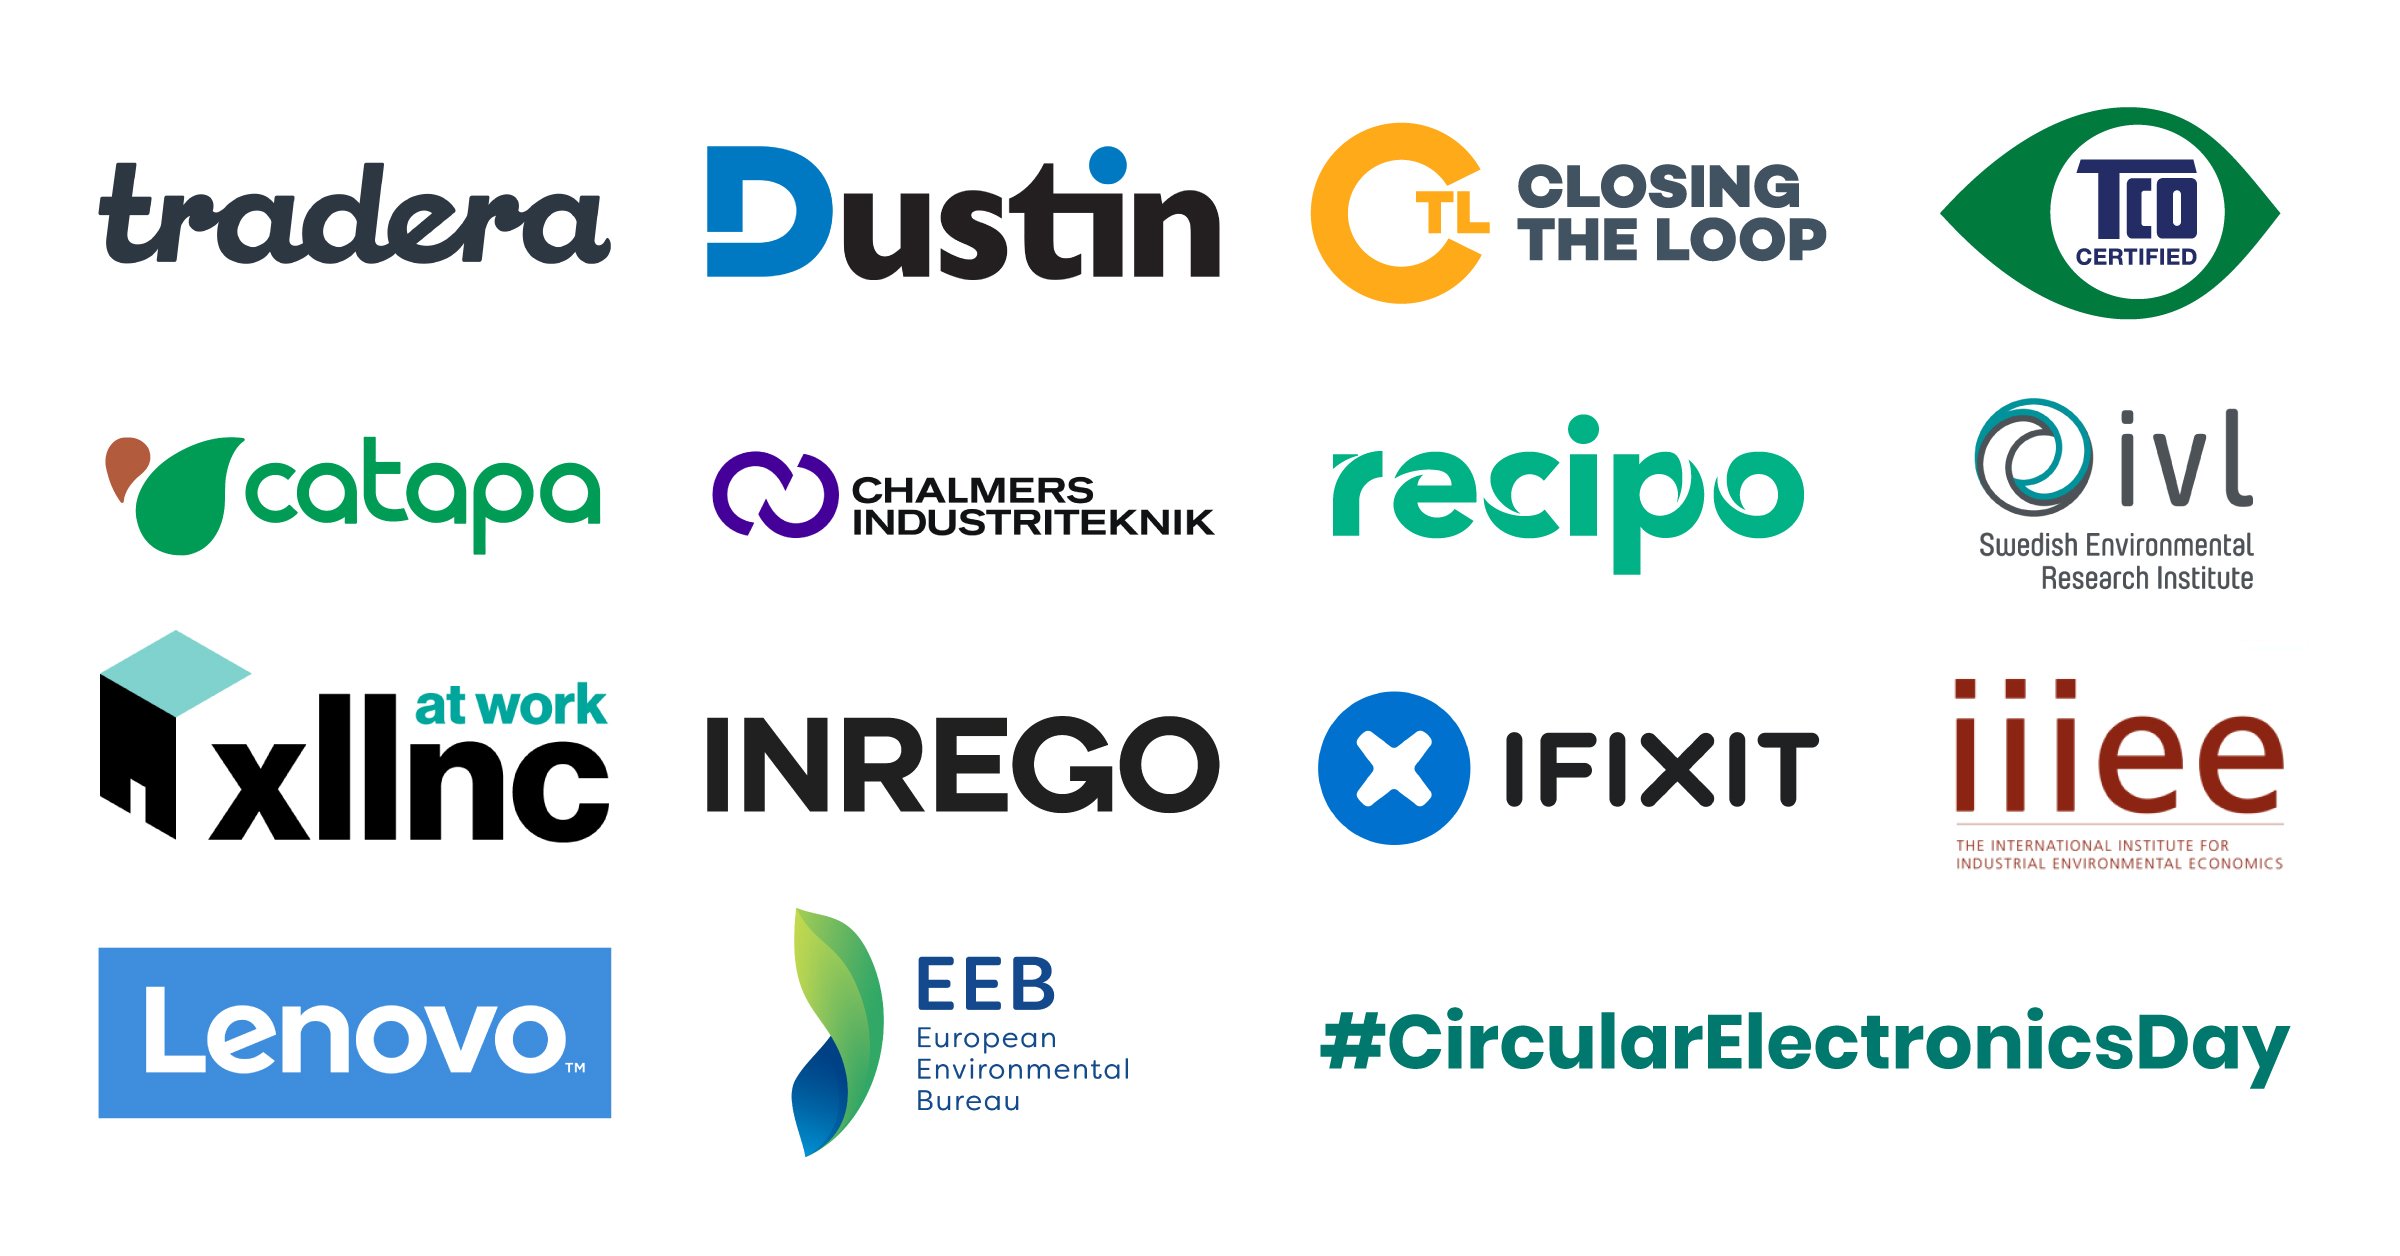 Organizations call for sustainable action on Circular Electronics Day